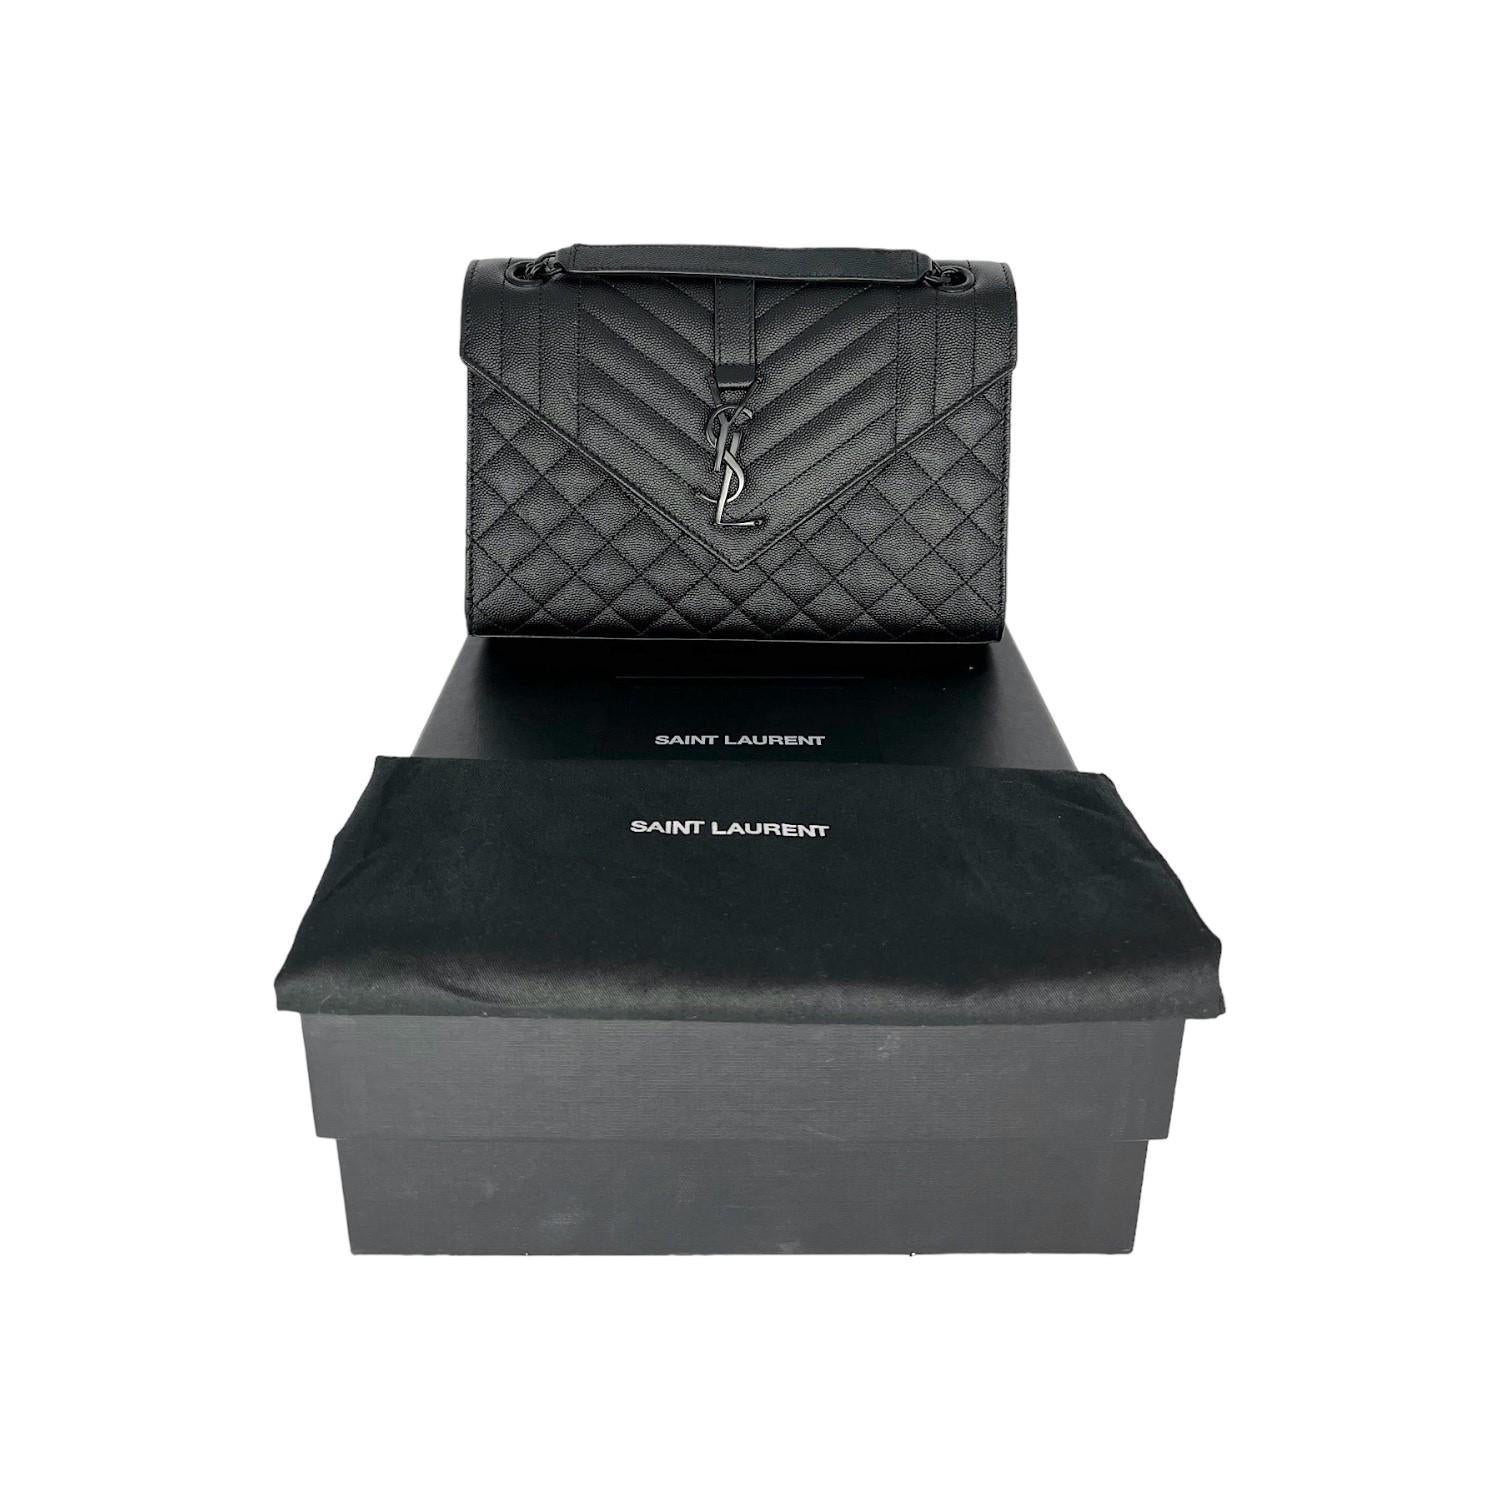 This Saint Laurent Medium Triquilt Envelope Bag was made in Italy and it is finely crafted of a black grained calfskin leather exterior with matte black hardware features. It has a slip pocket on the backside. It has a matte black chain-link